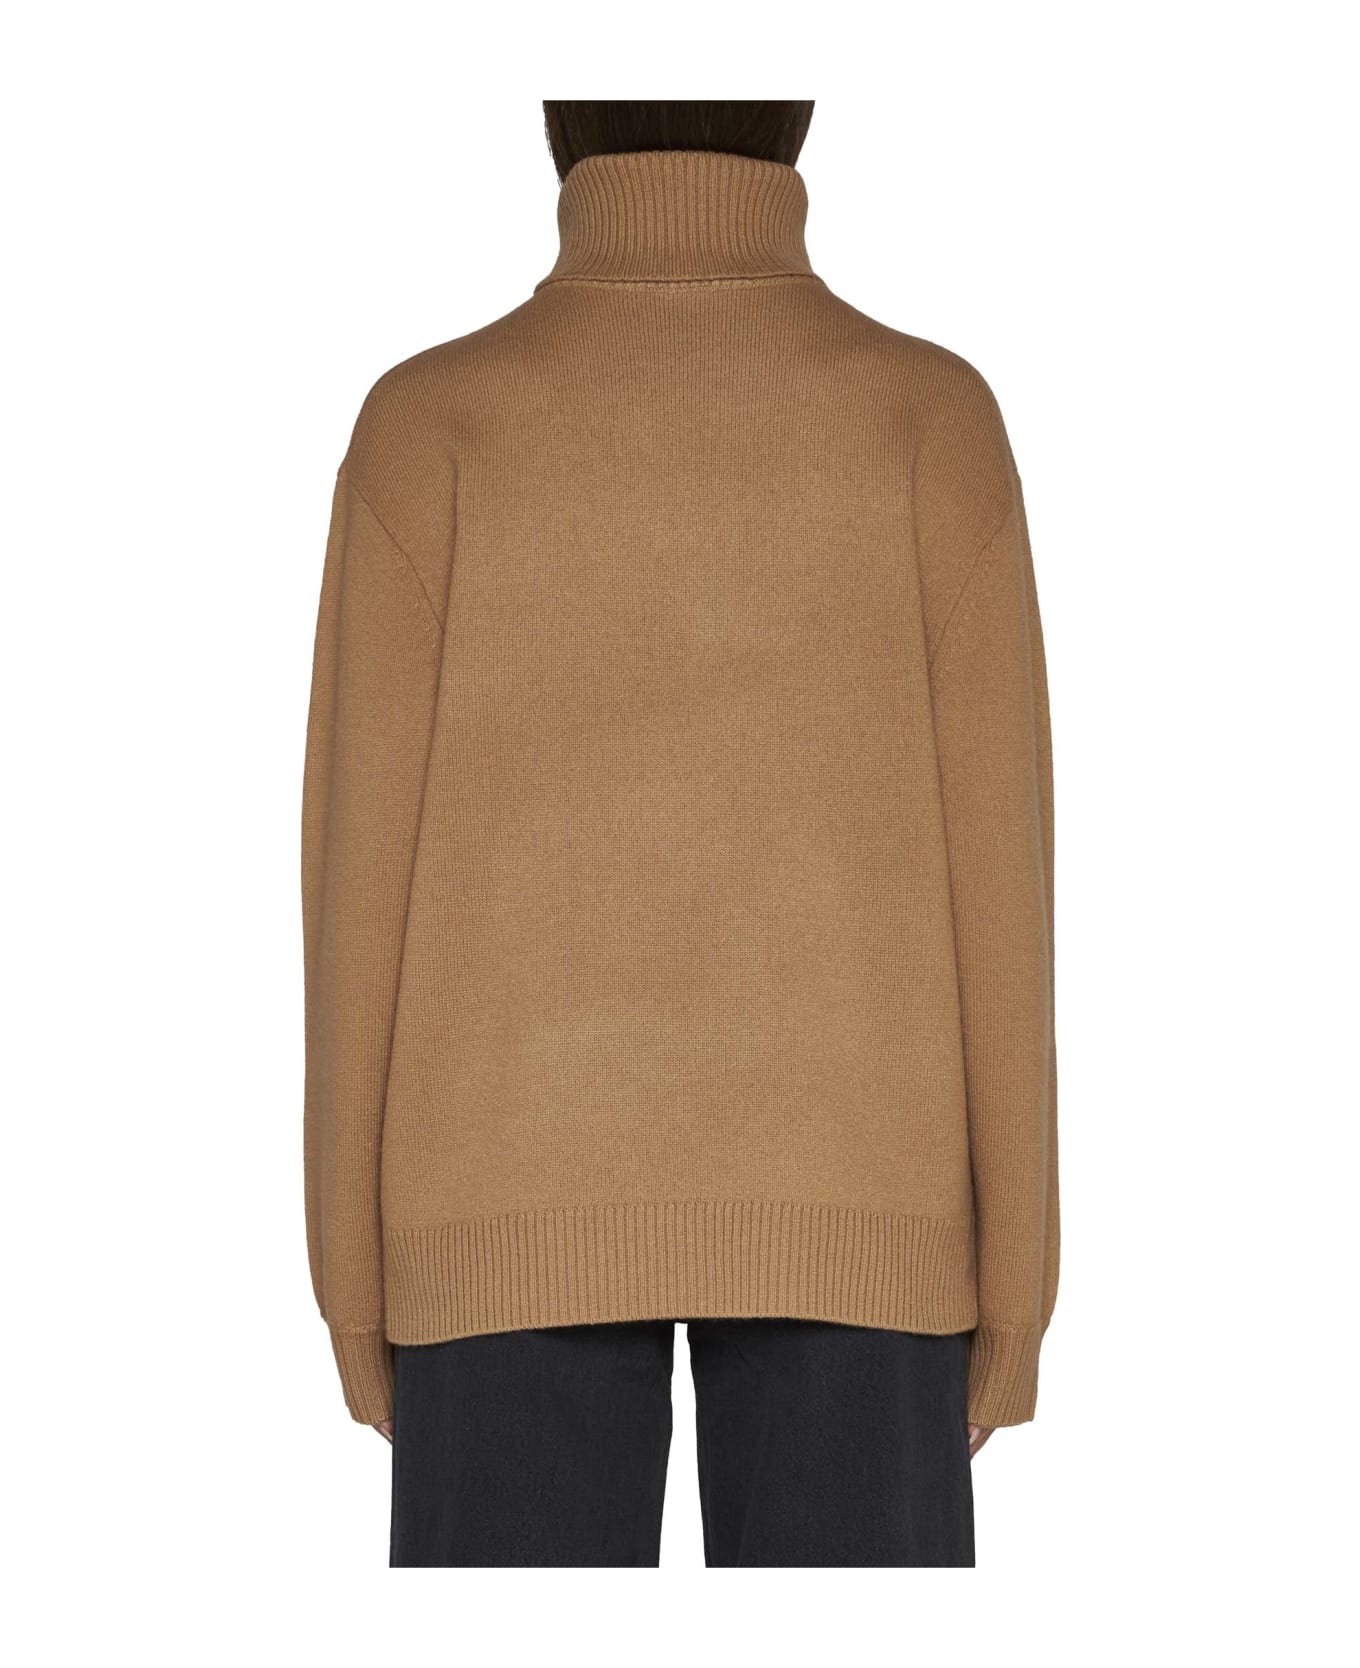 A.P.C. Walter Wool Pullover - Camel